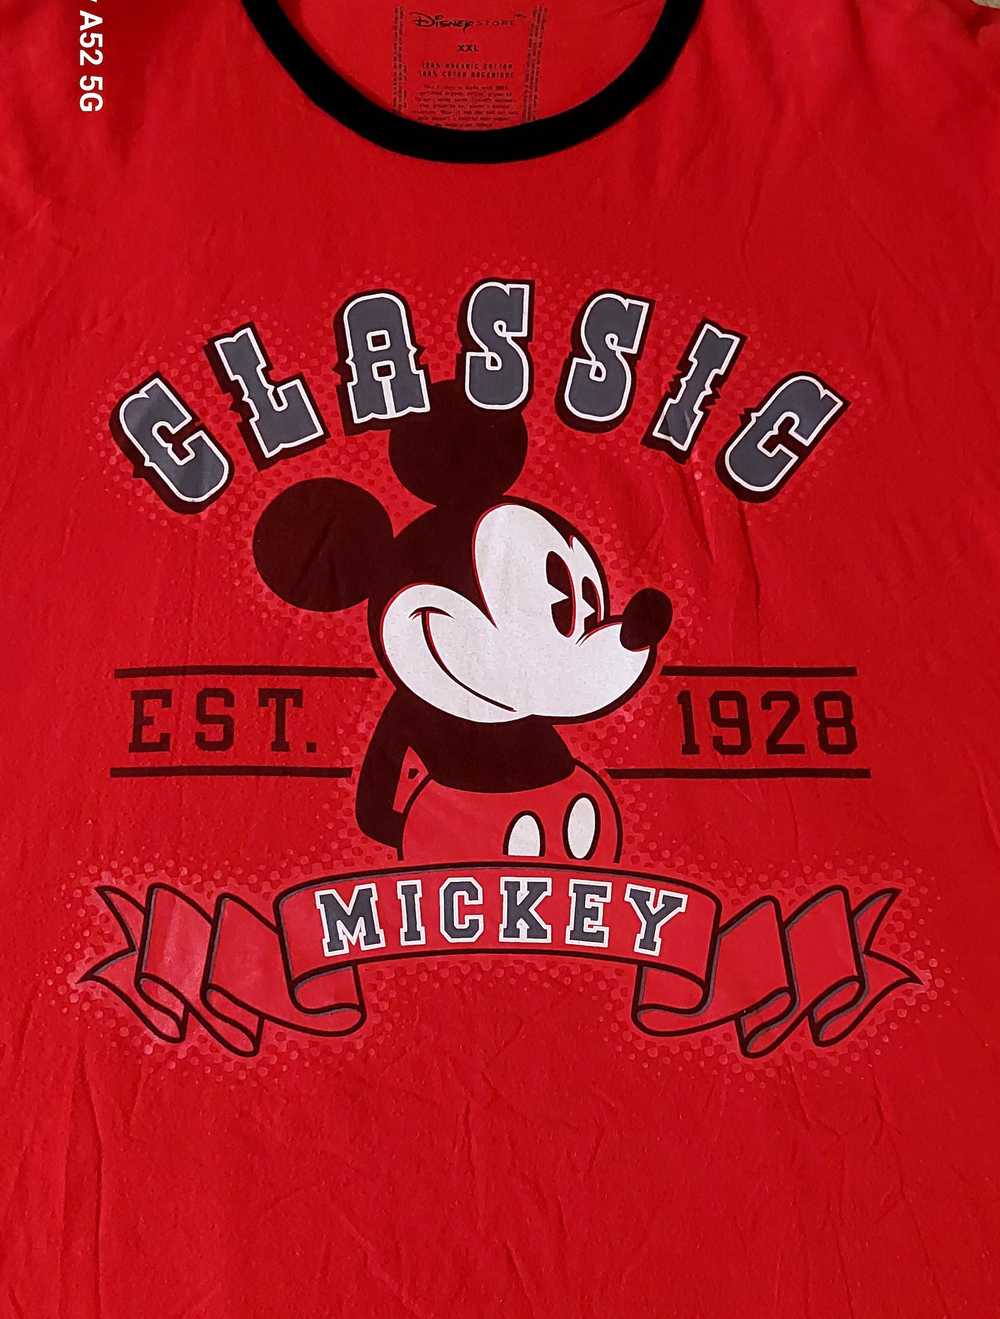 Disney Mickey Mouse - Classic Since 1928 - T-Shirt - image 1